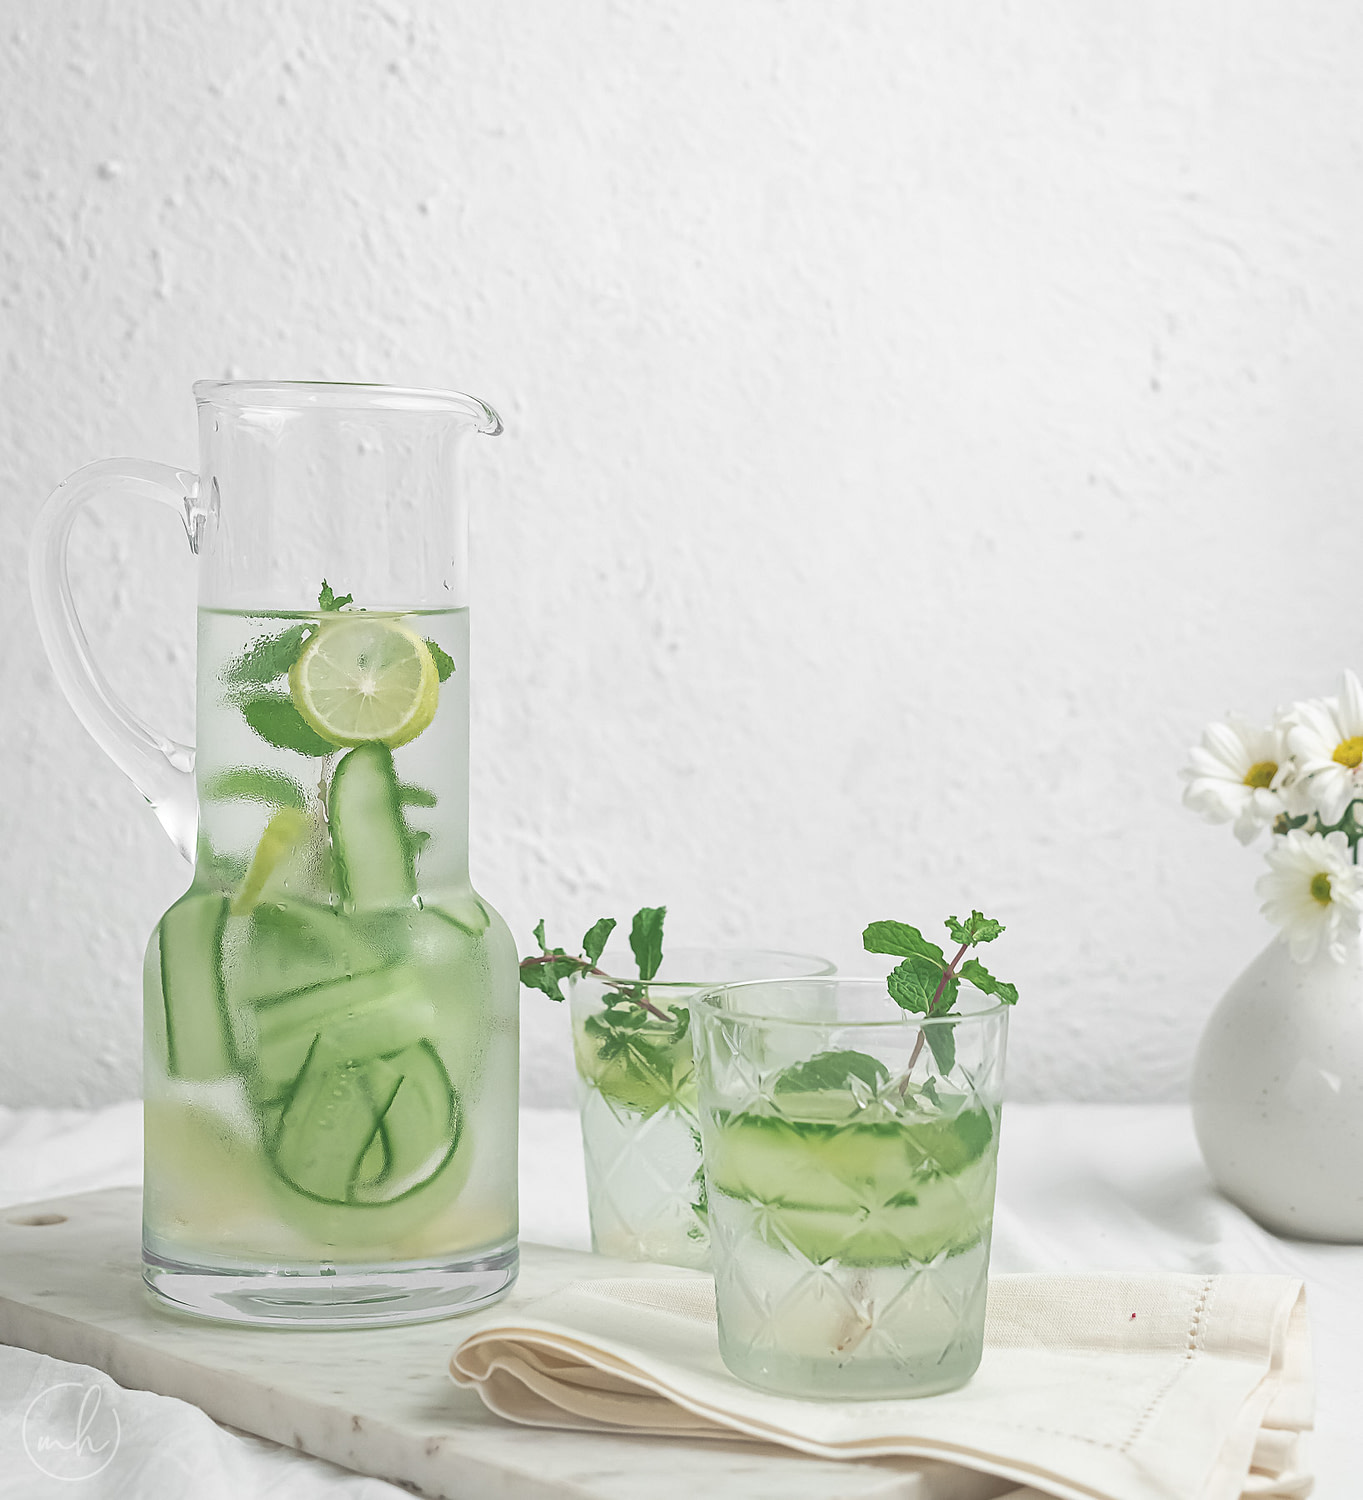 Two glasses of cucumber basil lemonade with cucumber slices as garnish. A potted vase with white flowers, cucumber peels, sliced lemon and a half-filled jar of lemonade is in the background.